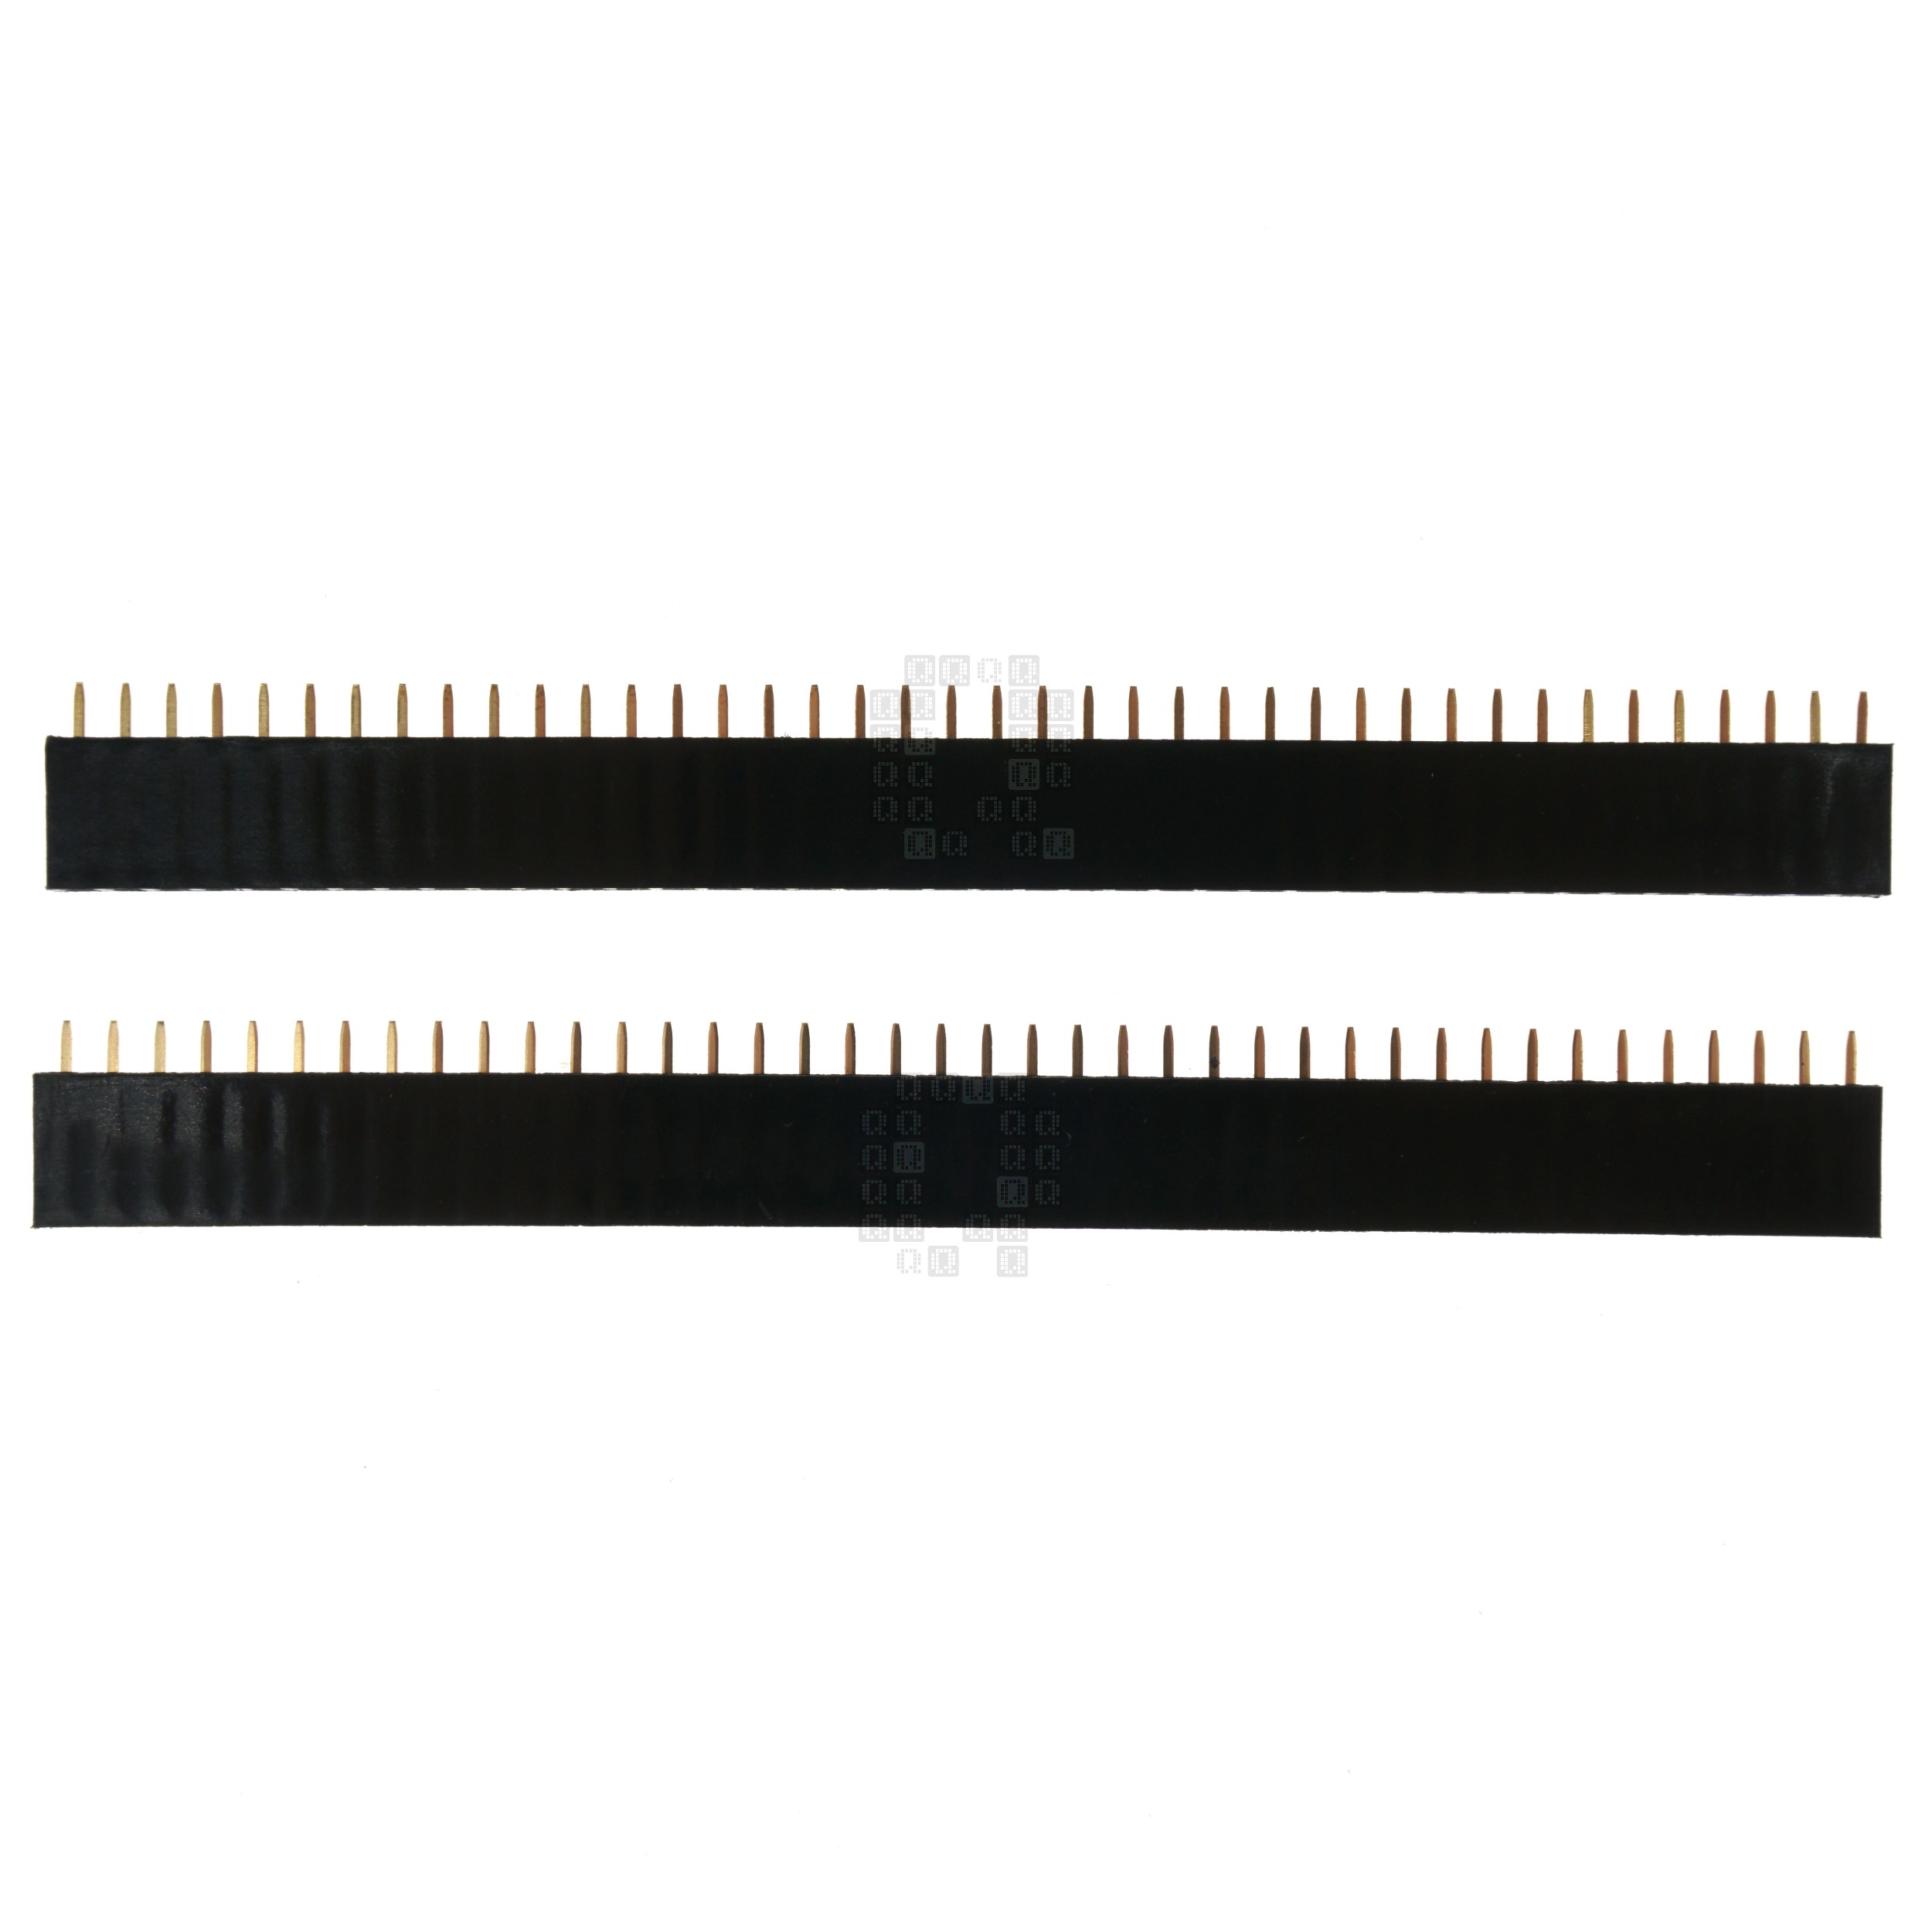 1x40 Single Row Female Straight Pin Header, 2.54mm Pitch, 2-Pack